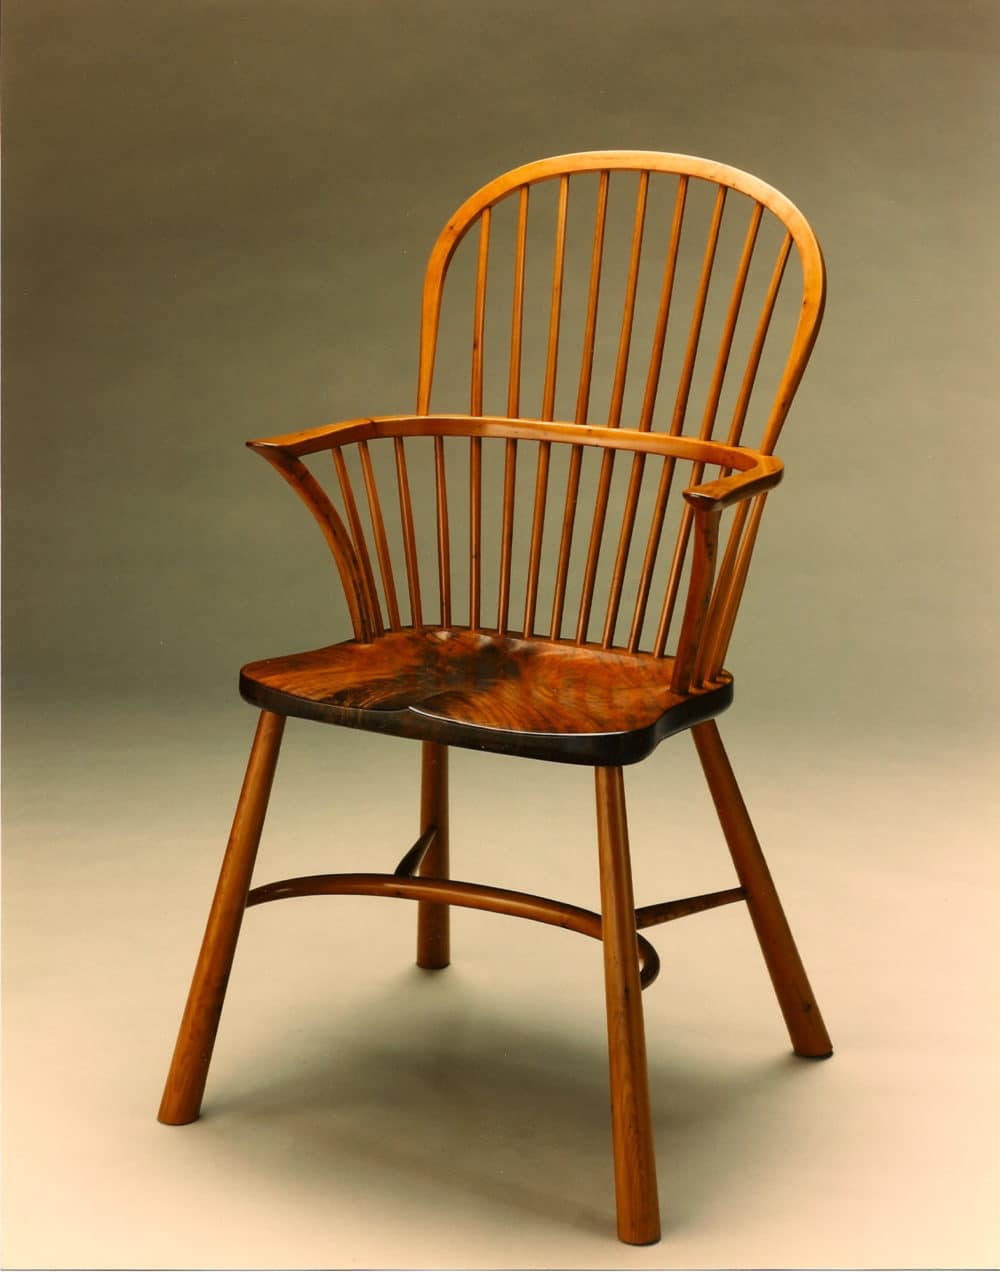 Gregory Hay DesignsEnglish Windsor Chair in Yew